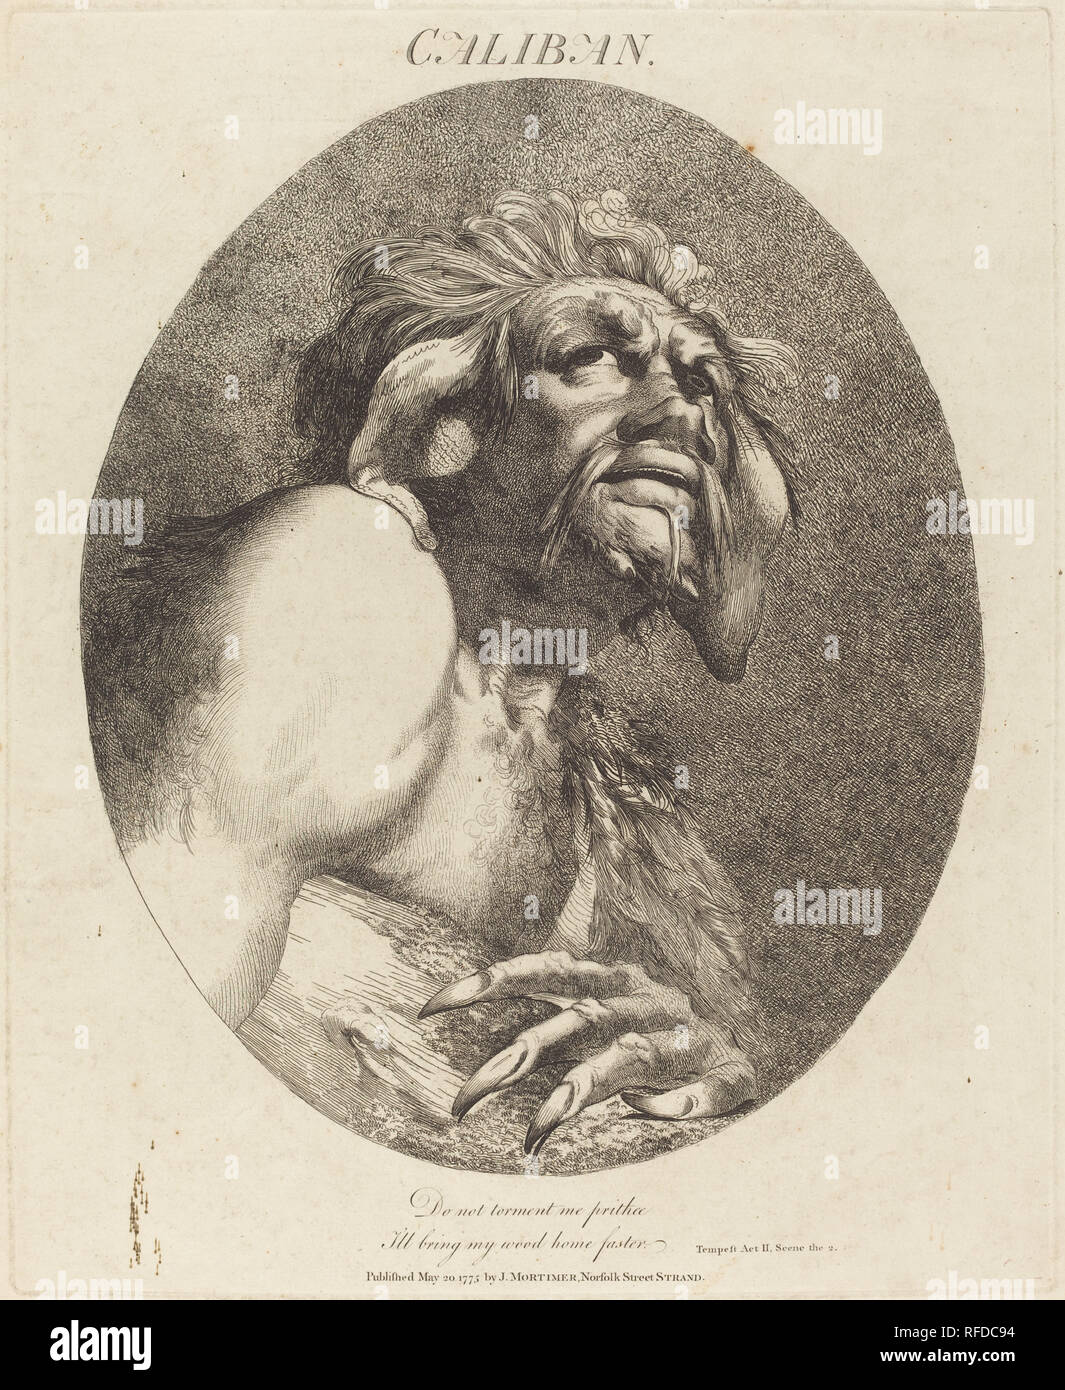 Caliban. Dated: 1775. Dimensions: plate: 40 x 32.4 cm (15 3/4 x 12 3/4 in.)  sheet: 55.5 x 39.6 cm (21 7/8 x 15 9/16 in.)  overall (mat): 71.1 x 55.9 cm (28 x 22 in.). Medium: etching. Museum: National Gallery of Art, Washington DC. Author: John Hamilton Mortimer. Stock Photo